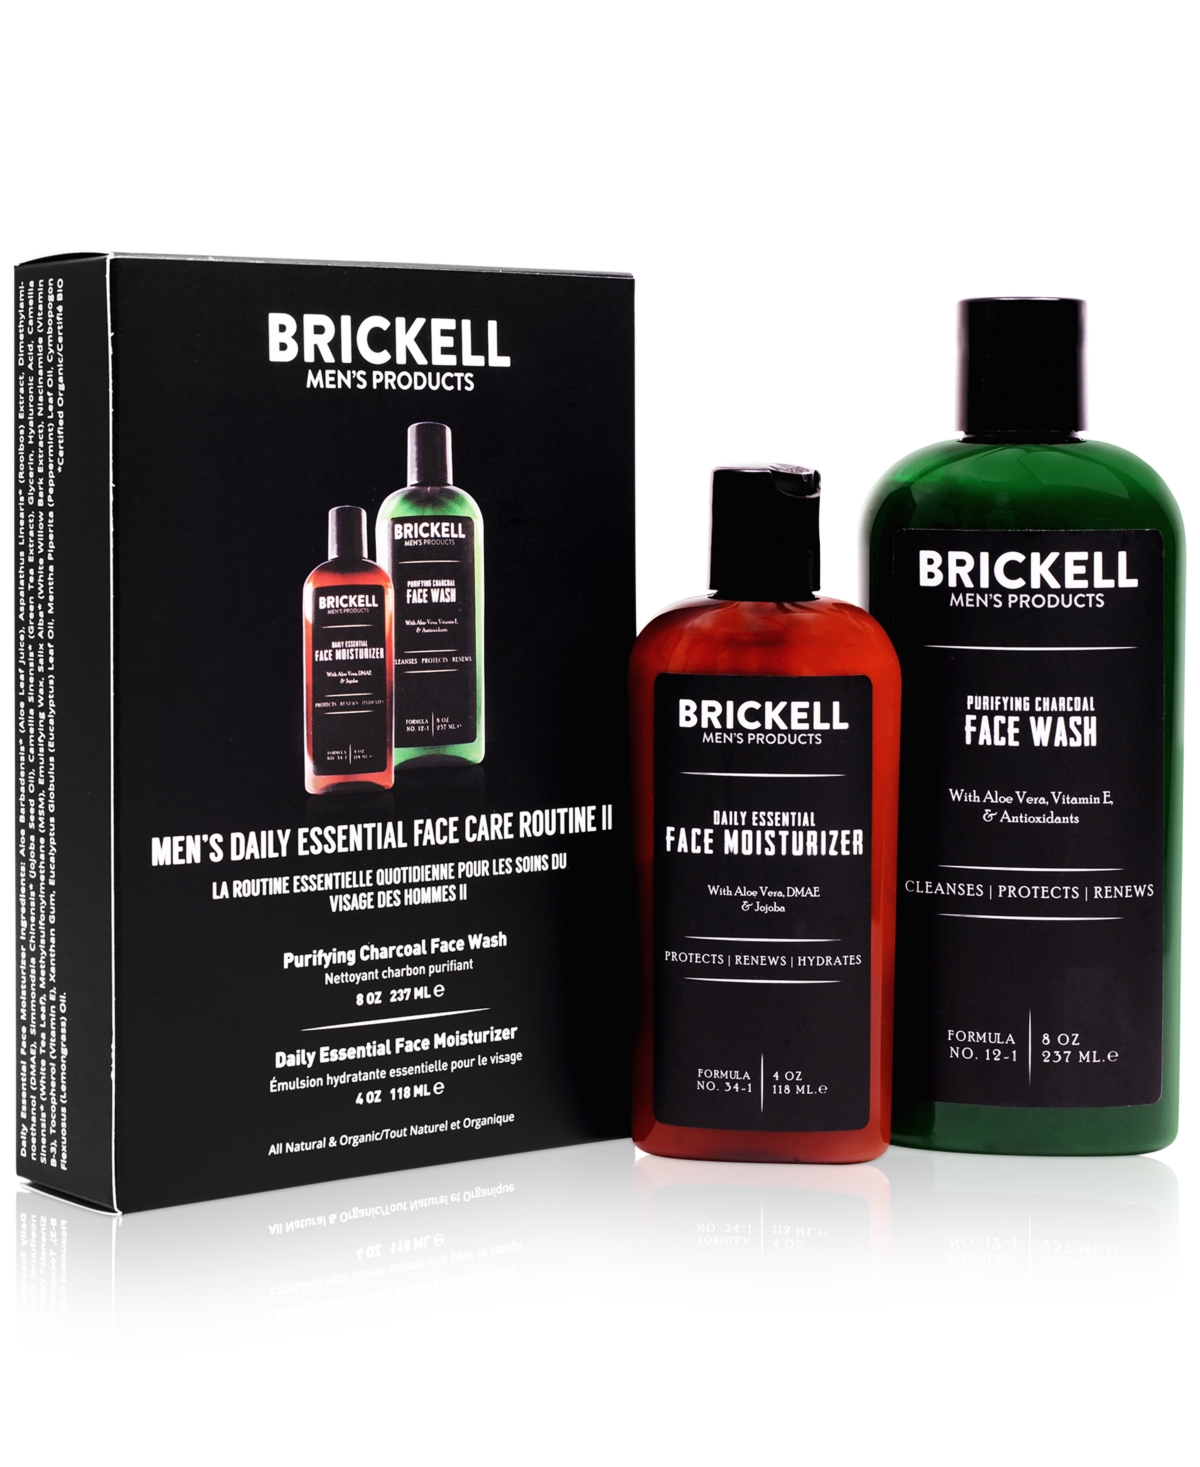 Brickell Mens Products Brickell Men's Products 2-pc. Men's Daily Essential Face Care Set In No Color